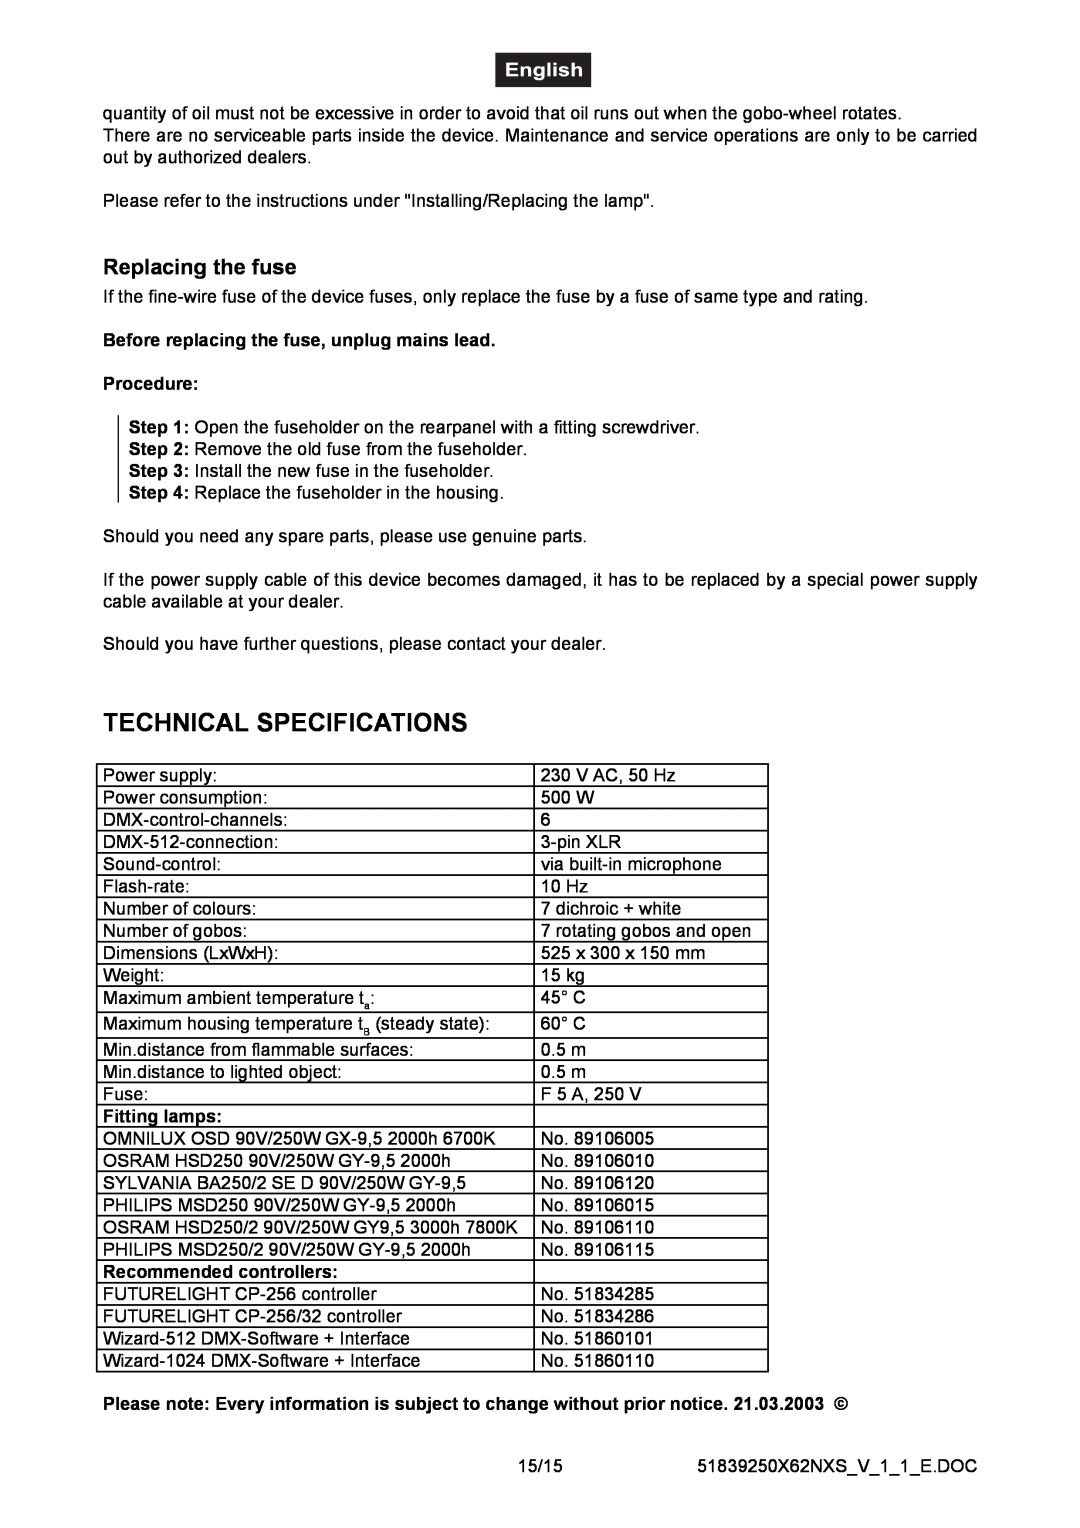 Futuretech 250 Technical Specifications, Replacing the fuse, Before replacing the fuse, unplug mains lead Procedure 